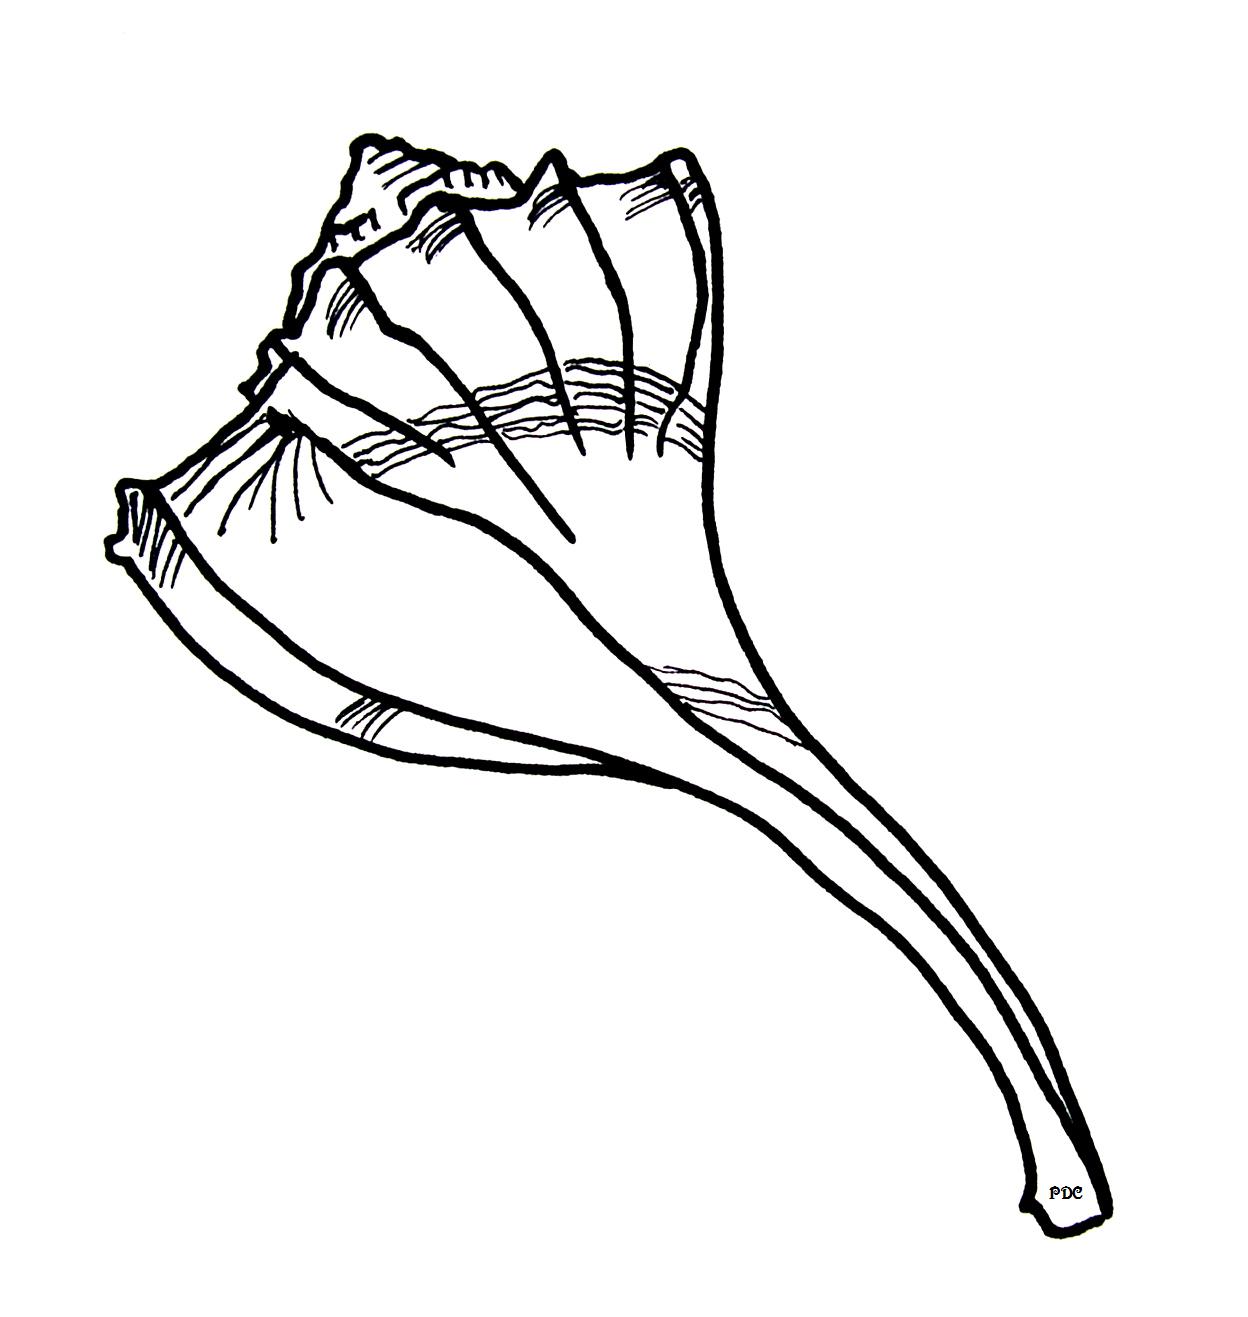 Seashell Drawing - ClipArt Best